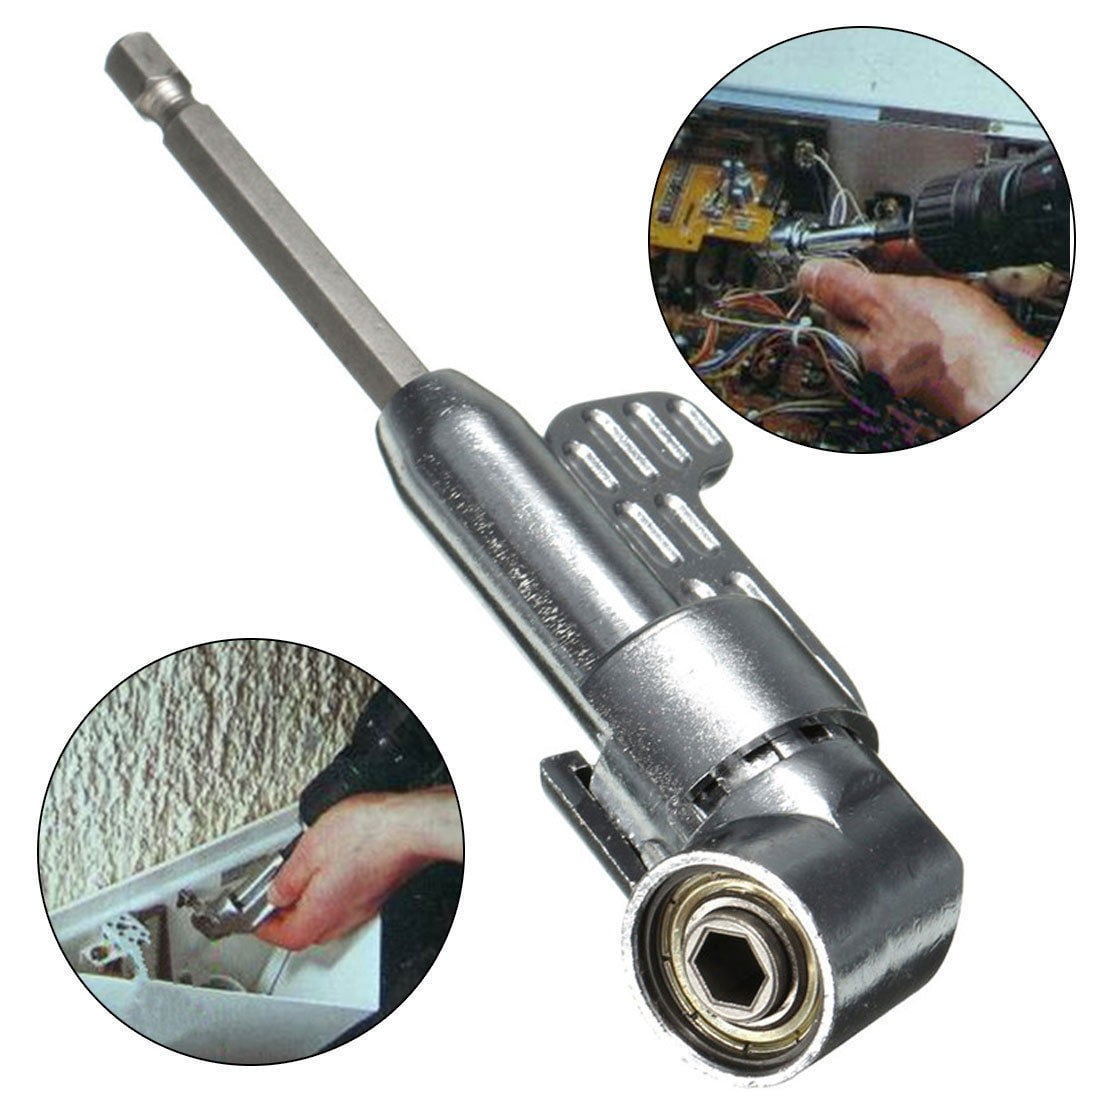 105° Long/ Short Right Angle 1/4" Head Screw Driver Flexible Angle Extension Bit 